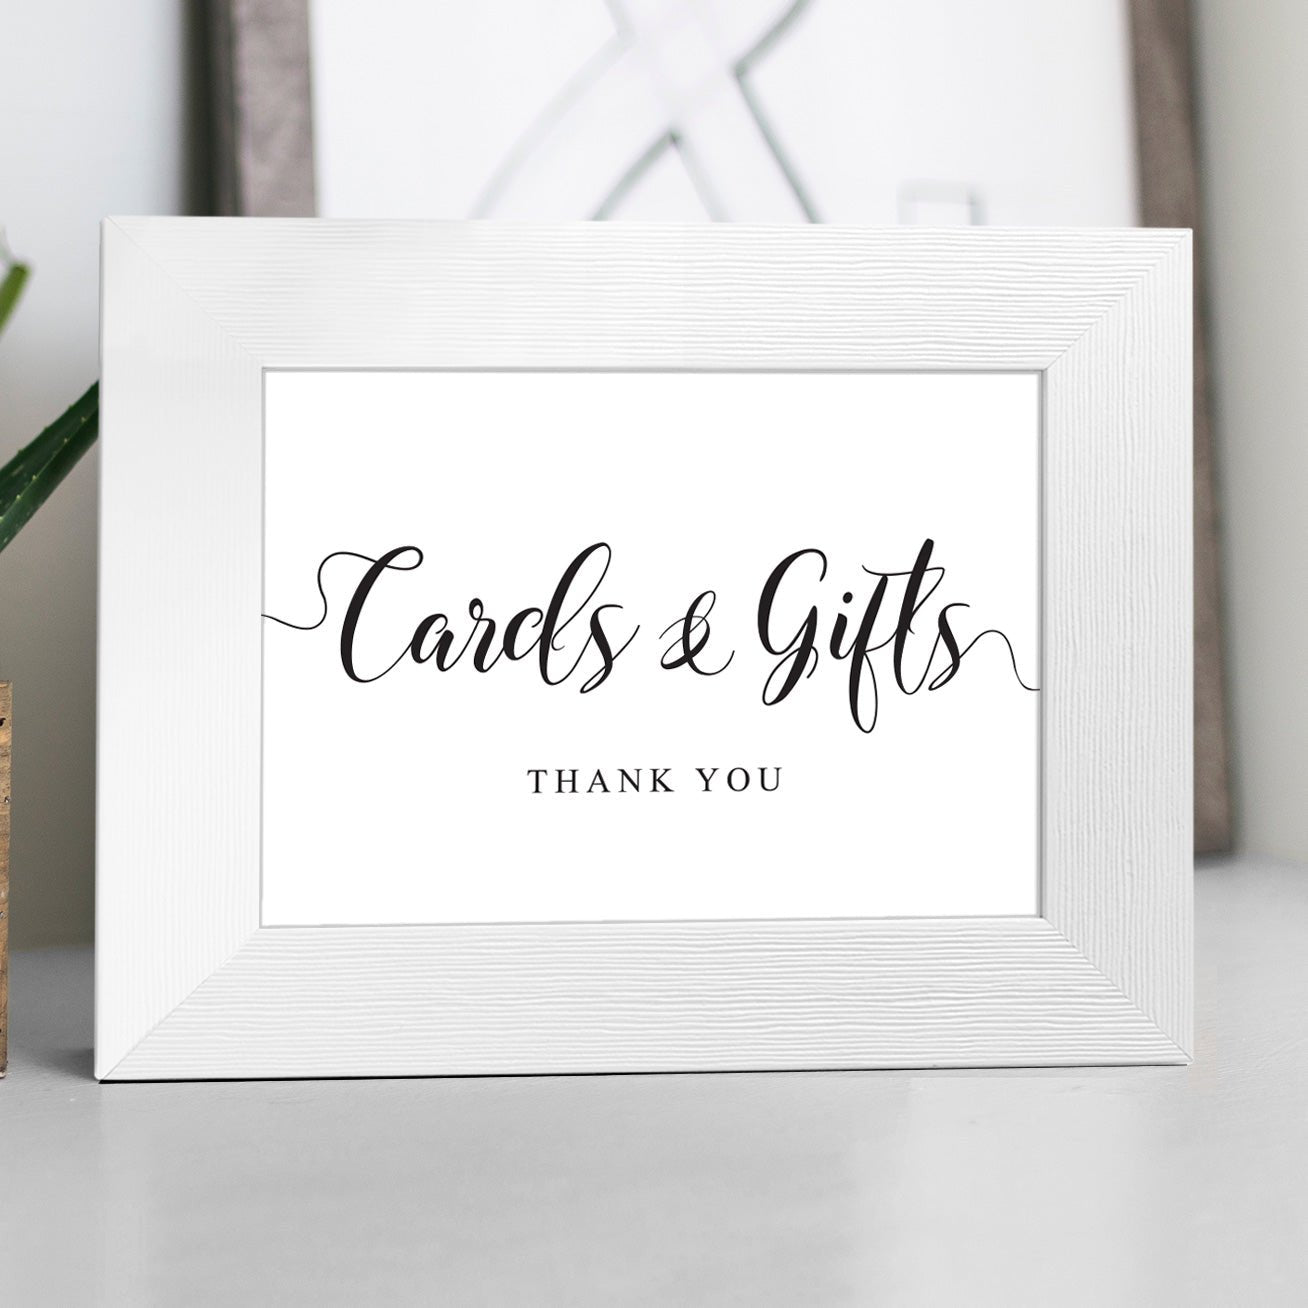 elegant cards and gifts sign in a white frame